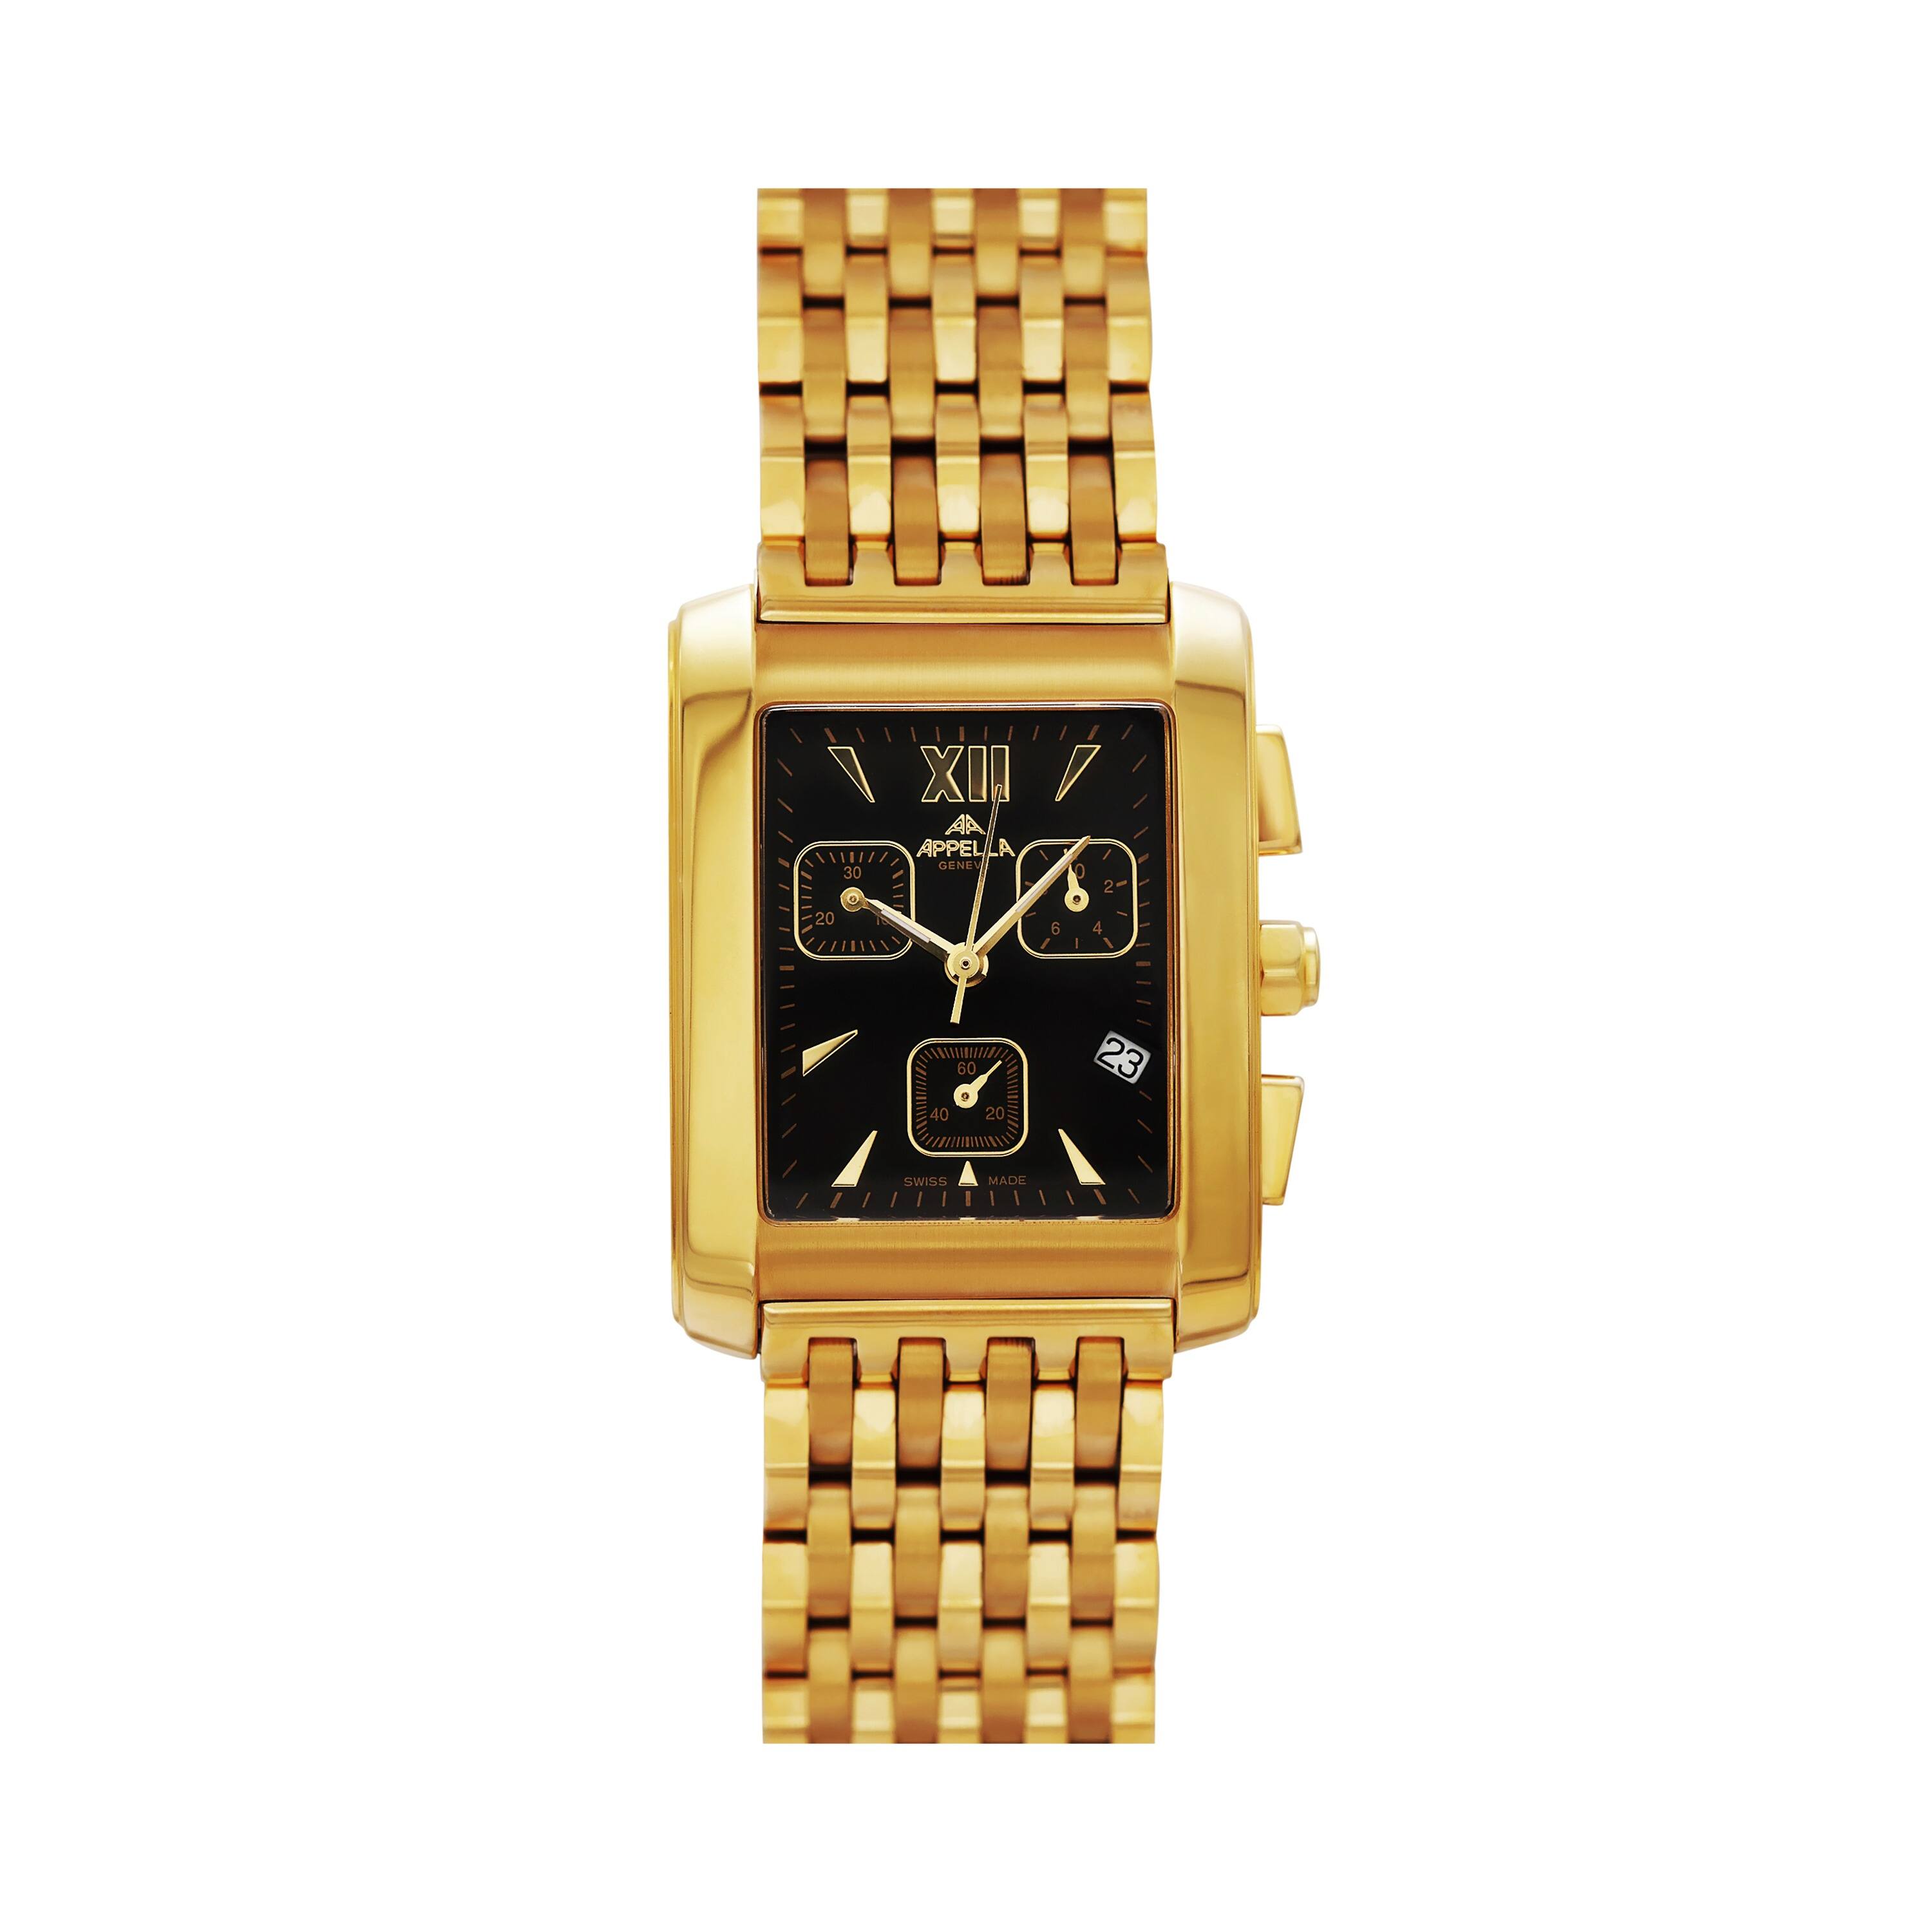 Appella Geneve Quartz 18 Gold Plated Woman Watch for $184 for sale from a  Private Seller on Chrono24